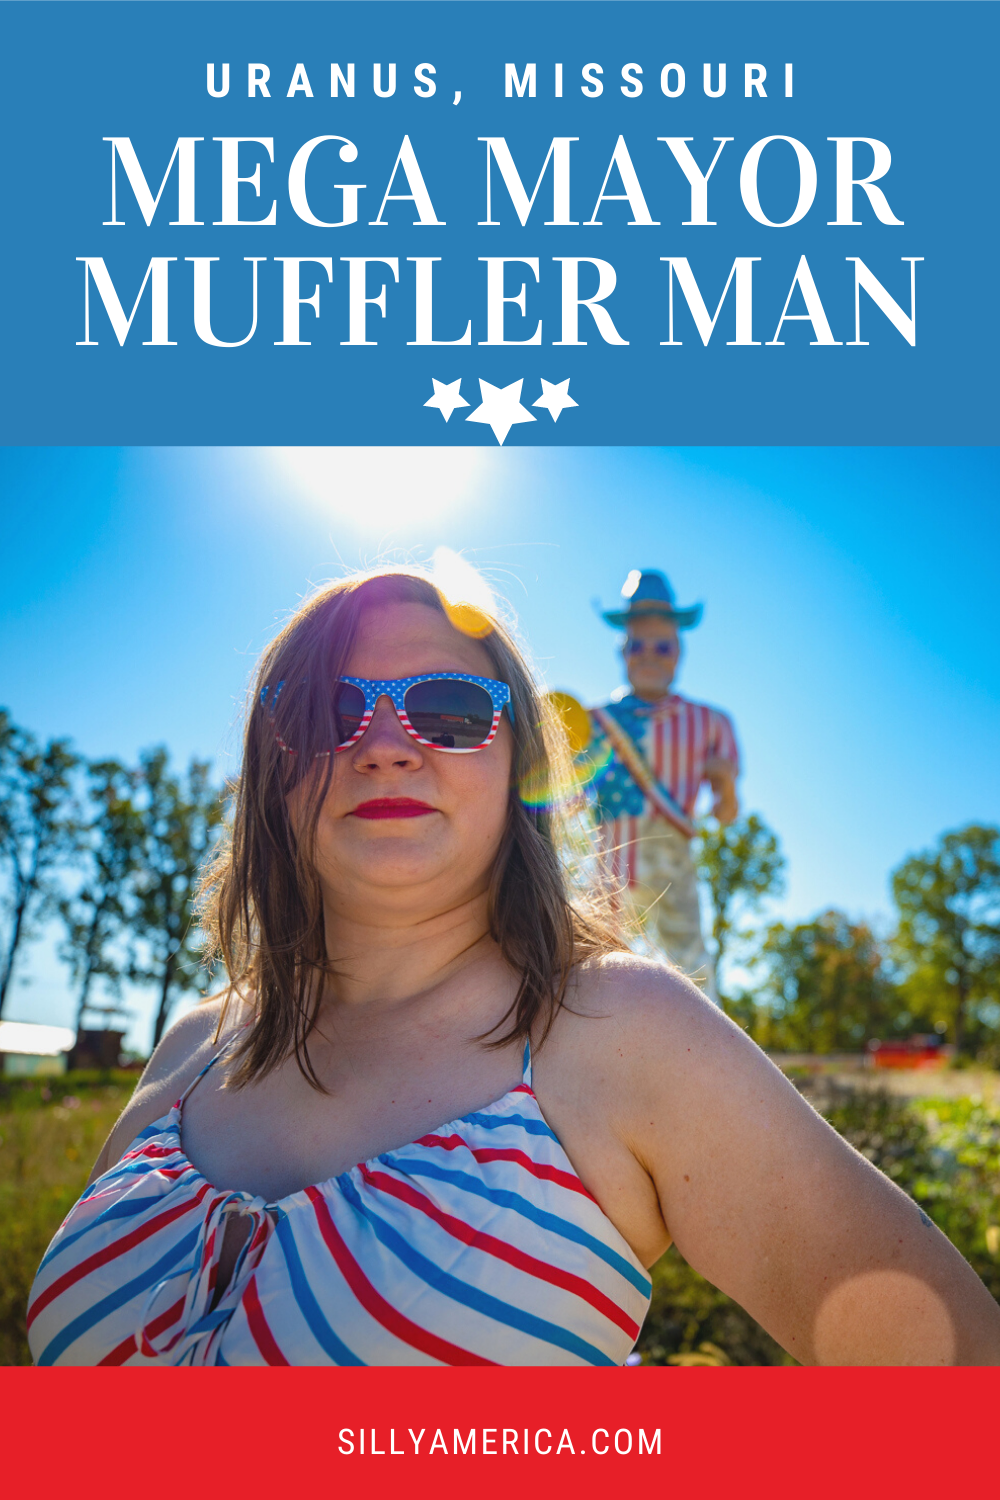 What do you do when you already own one of the weirdest stops on Route 66? Make it more weird! And what better way to do that than by adding a muffler man. Better yet, a custom made muffler man roadside attraction modeled after yourself. Find the Mega Mayor Muffler Man in Uranus, Missouri. Stop on your Route 66 road trip!  #Route66 #Route66RoadTrip #MissouriRoute66 #Missouri #MissouriRoadTrip #MissouriRoadsideAttractions #RoadsideAttractions #RoadsideAttraction #RoadsideAmerica #RoadTrip